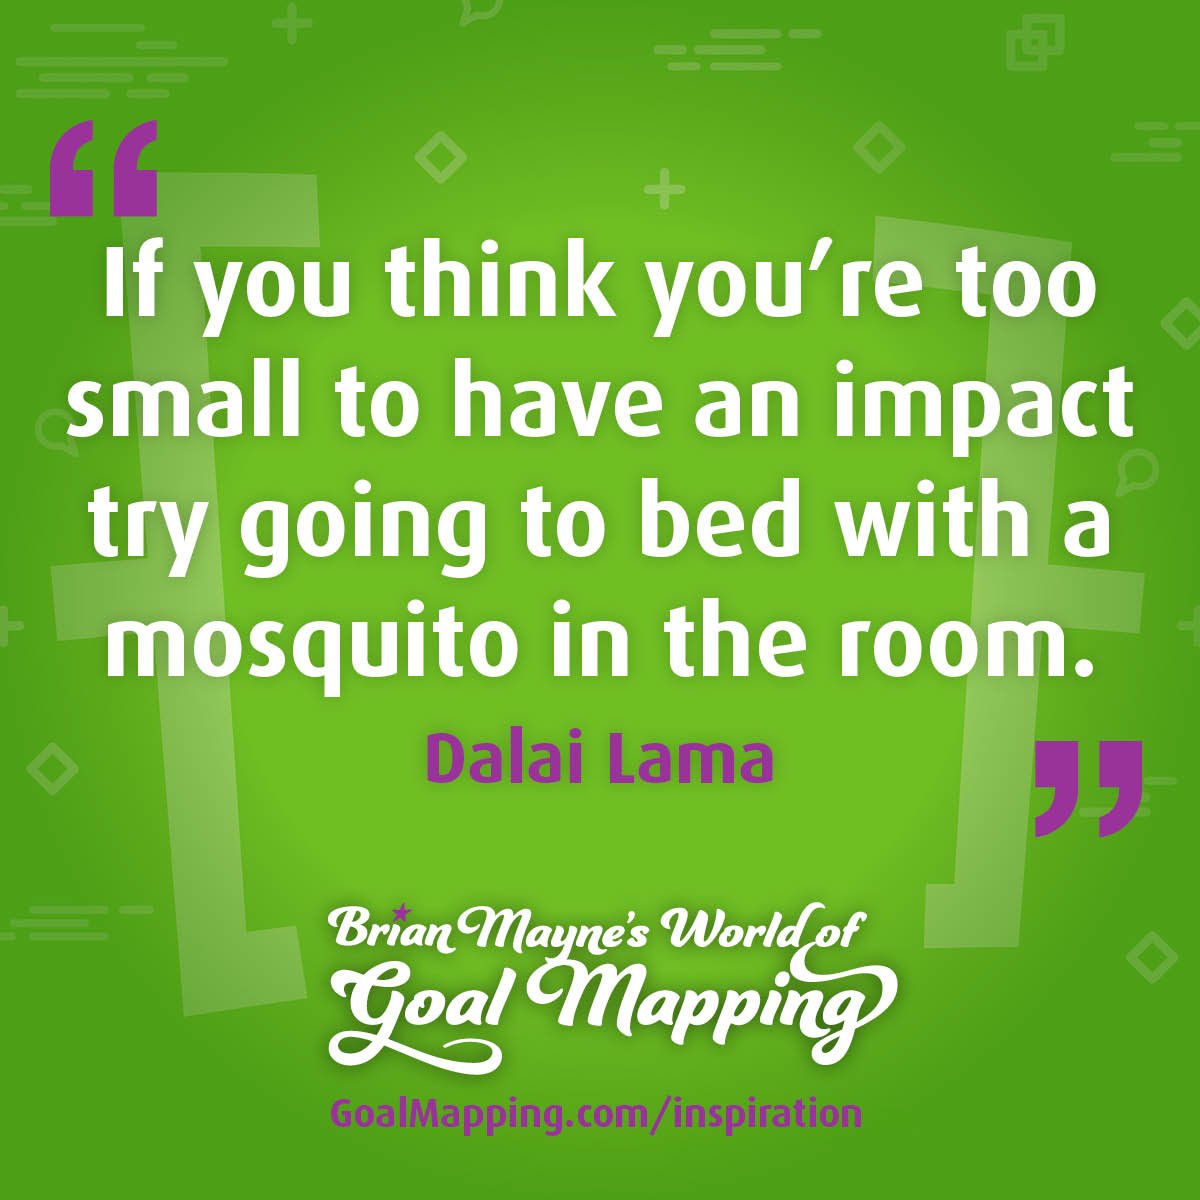 "If you think you're too small to have an impact try going to bed with a mosquito in the room." Dalai Lama